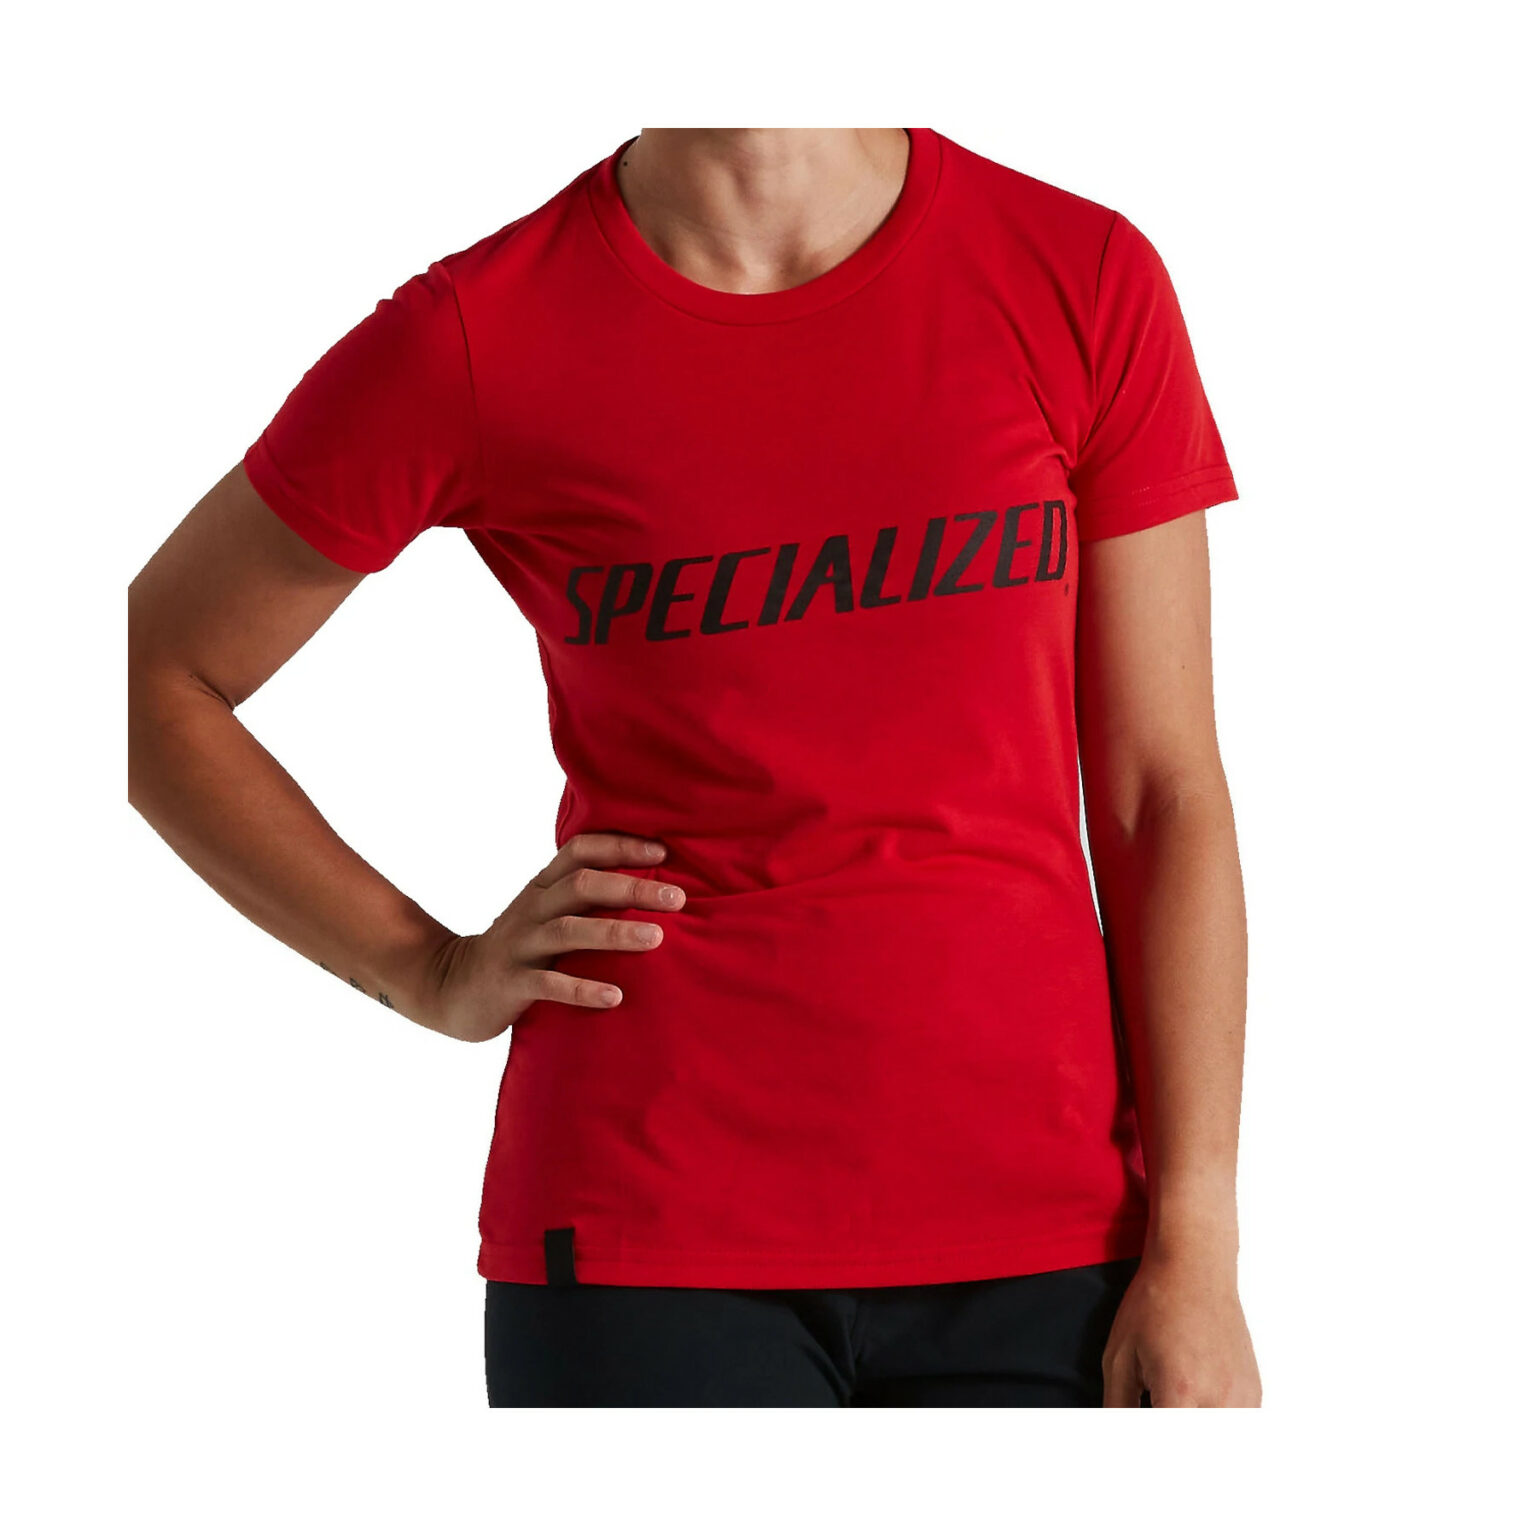 T-Shirt Donna con logo Specialized